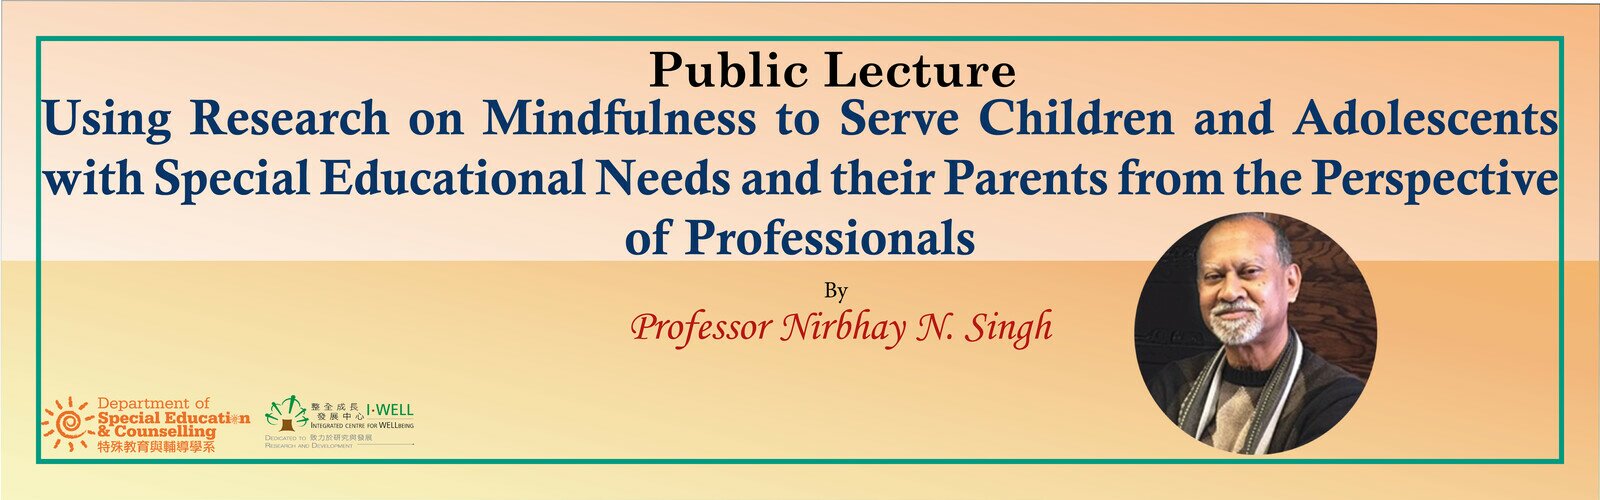 Using Research on Mindfulness to Serve Children and Adolescents with Special Educational Needs and their Parents from the Perspective of Professionals